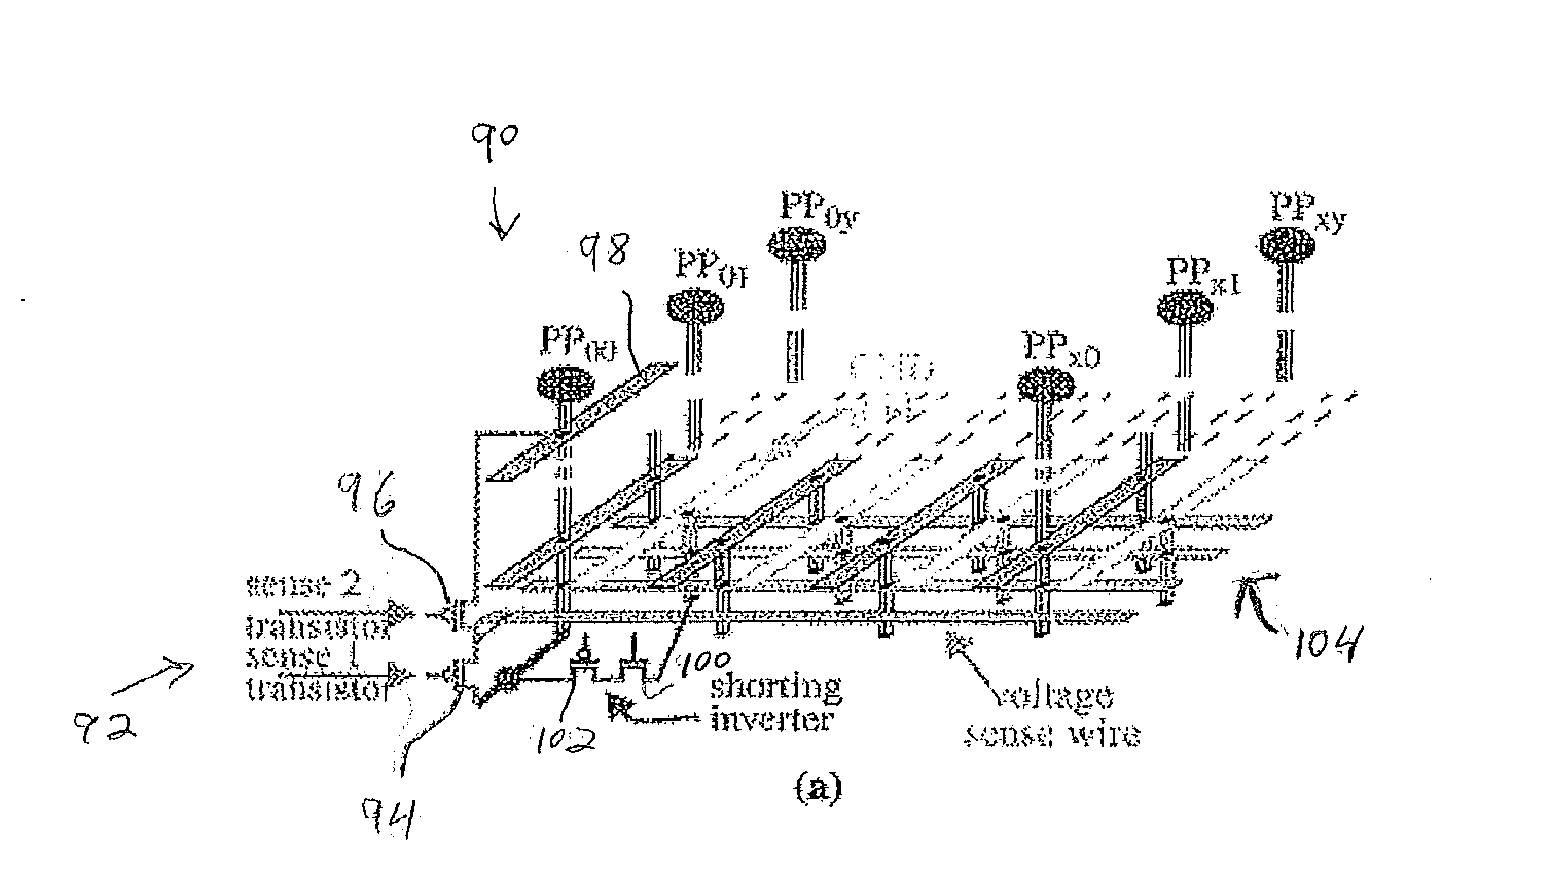 System and methods for generating unclonable security keys in integrated circuits